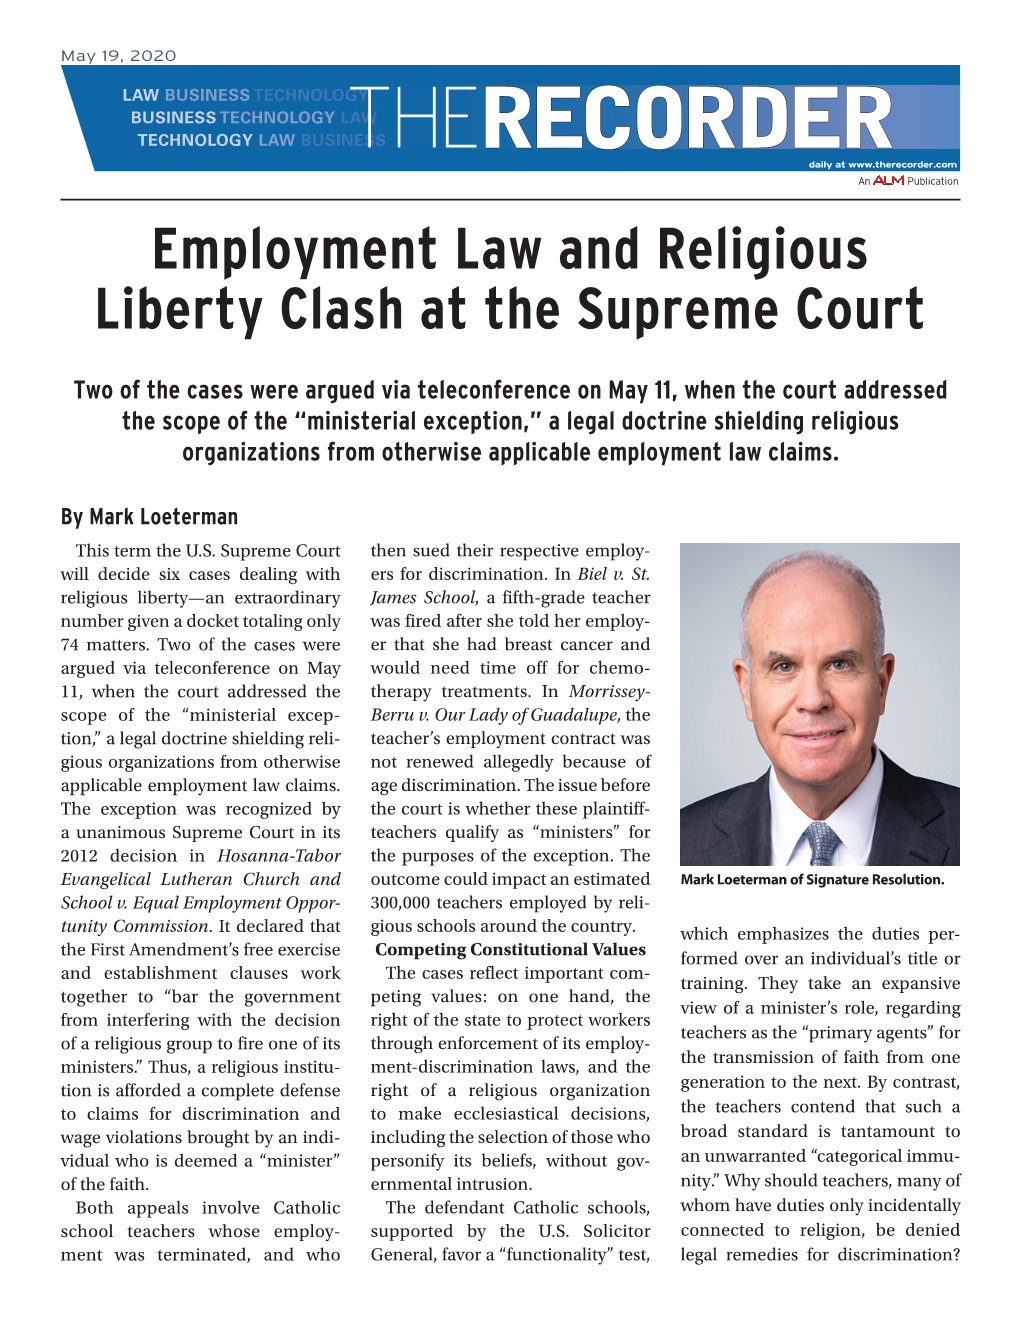 RECORDER Daily at Employment Law and Religious Liberty Clash at the Supreme Court